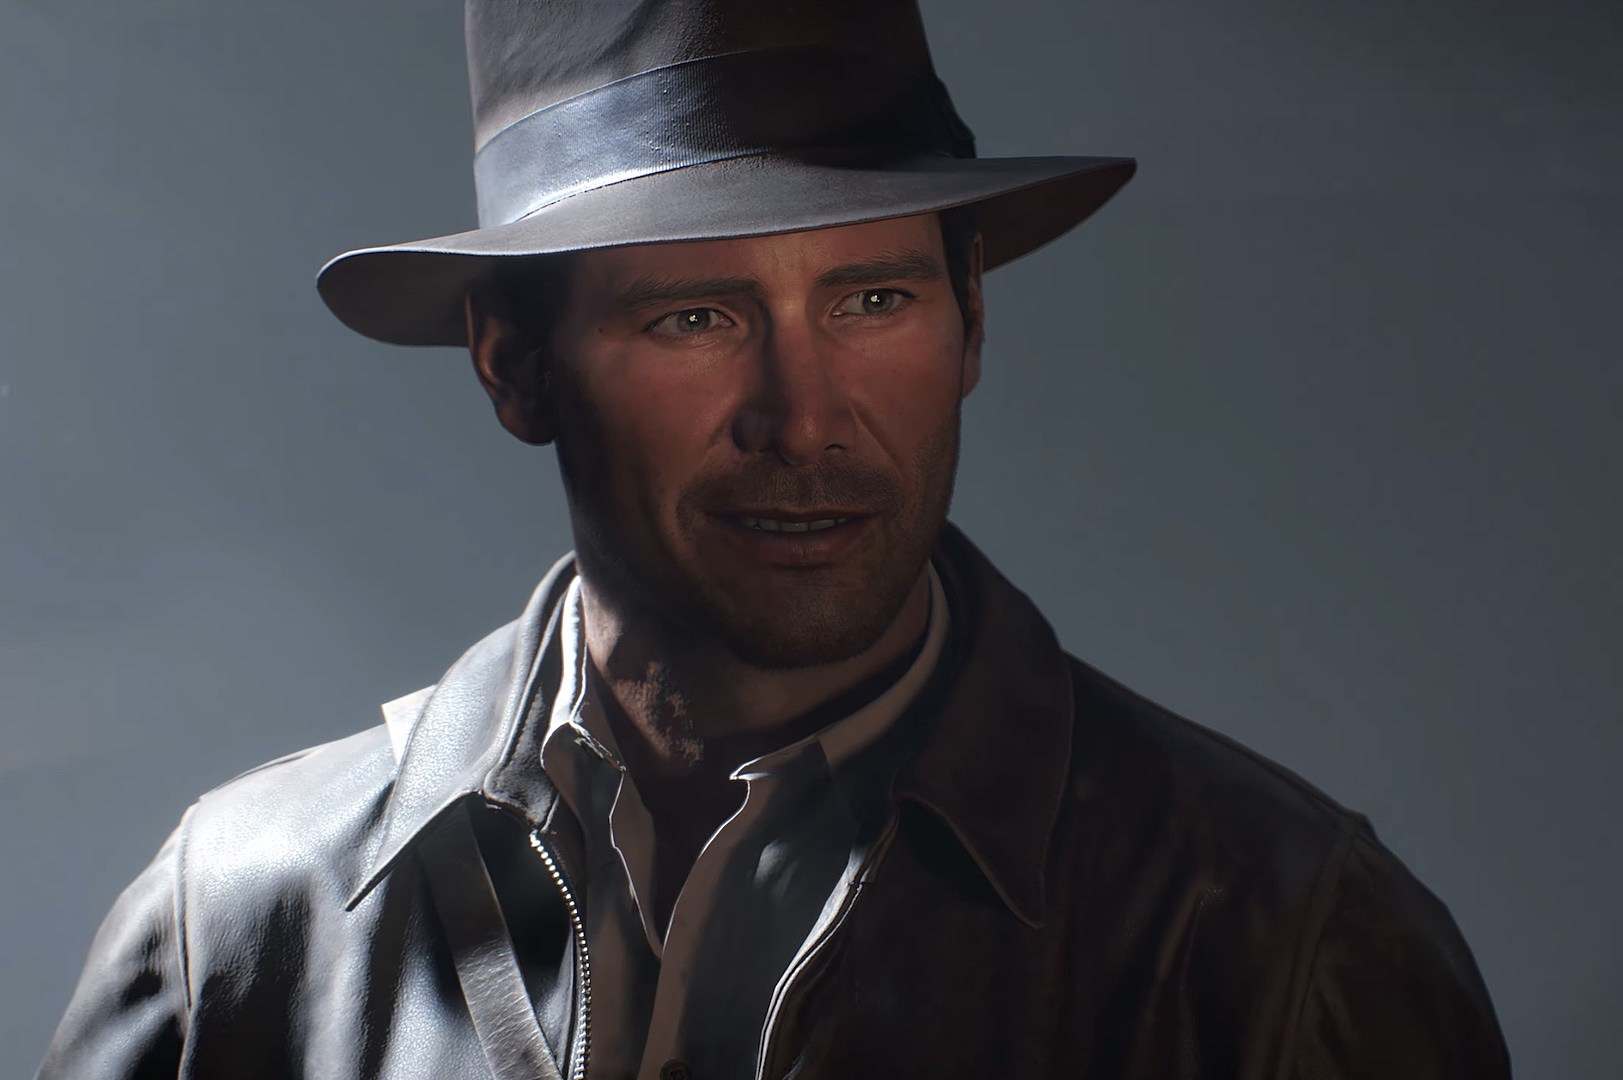 Gameplay Trailer Gives First Look at New Indiana Jones Game